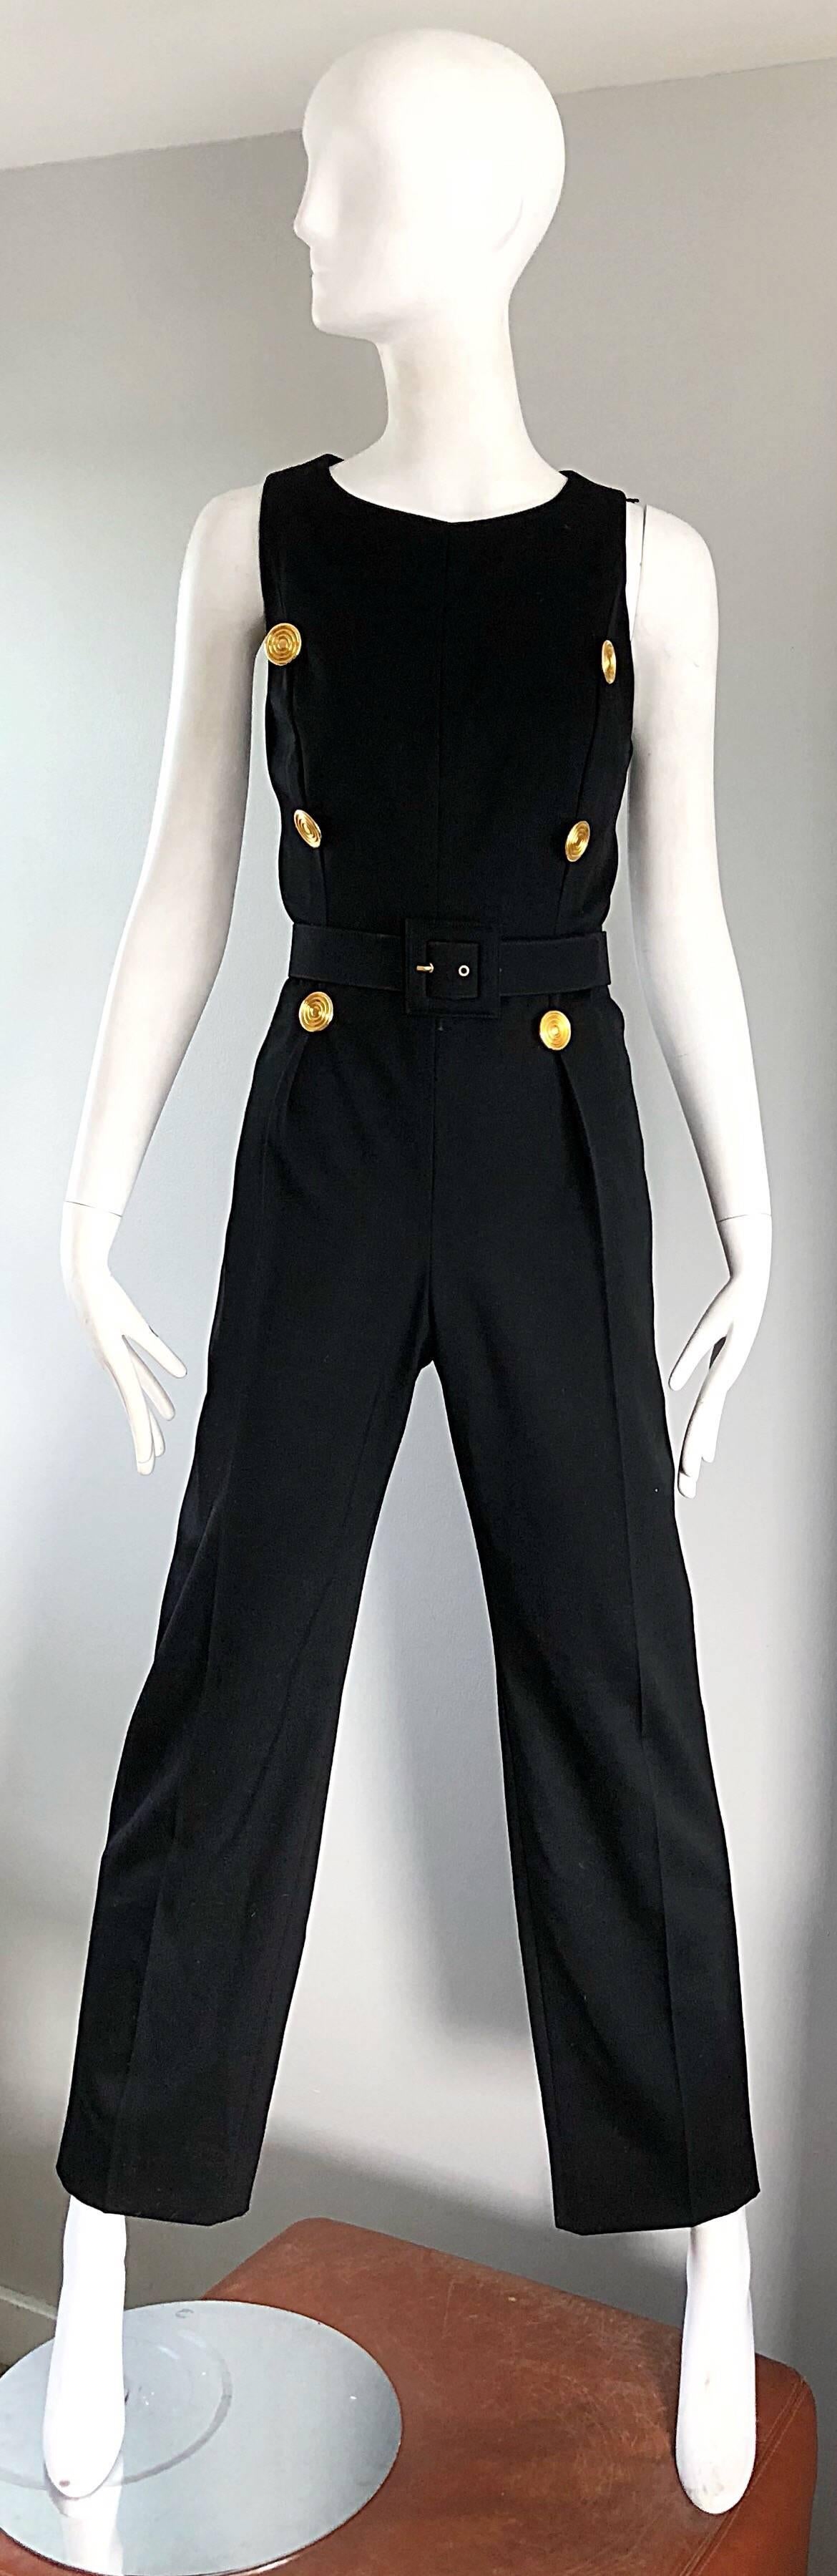 Amazing 1990s / 90s GIVENCHY COUTURE, by ALEXANDER MCQUEEN black one piece Jumpsuit and cropped blazer jacket! Features a tailored sleeveless jumpsuit, original belt, and matching cropped bolero jacket. Mock gold hammered buttons up the up the sides